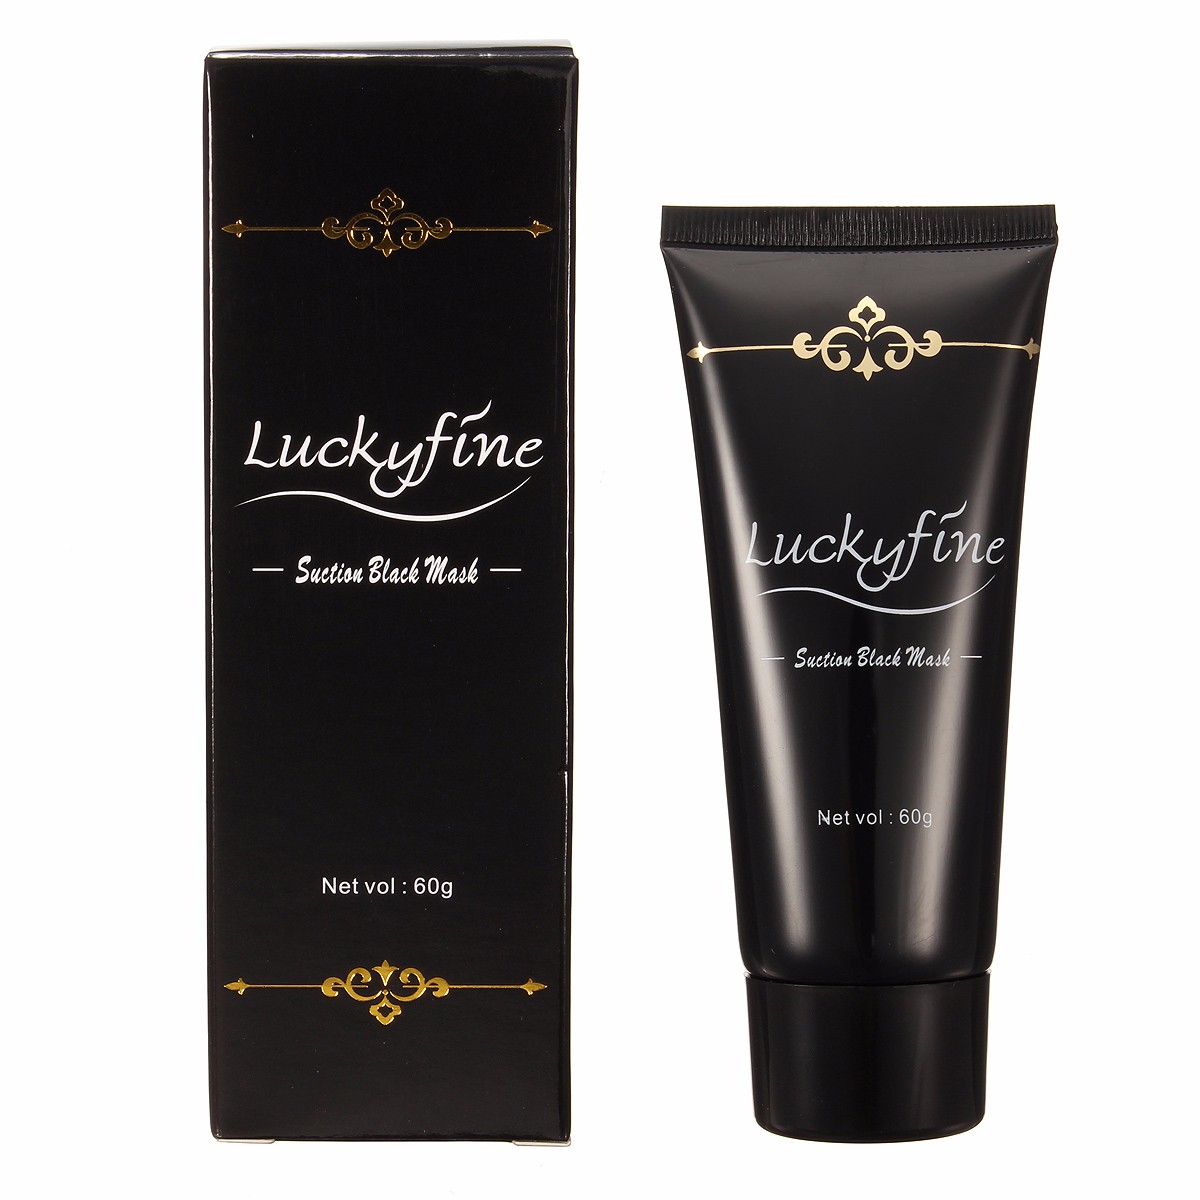 Luckyfine Charcoal Black Mask Peel-Off Blackhead Remover Face Nose